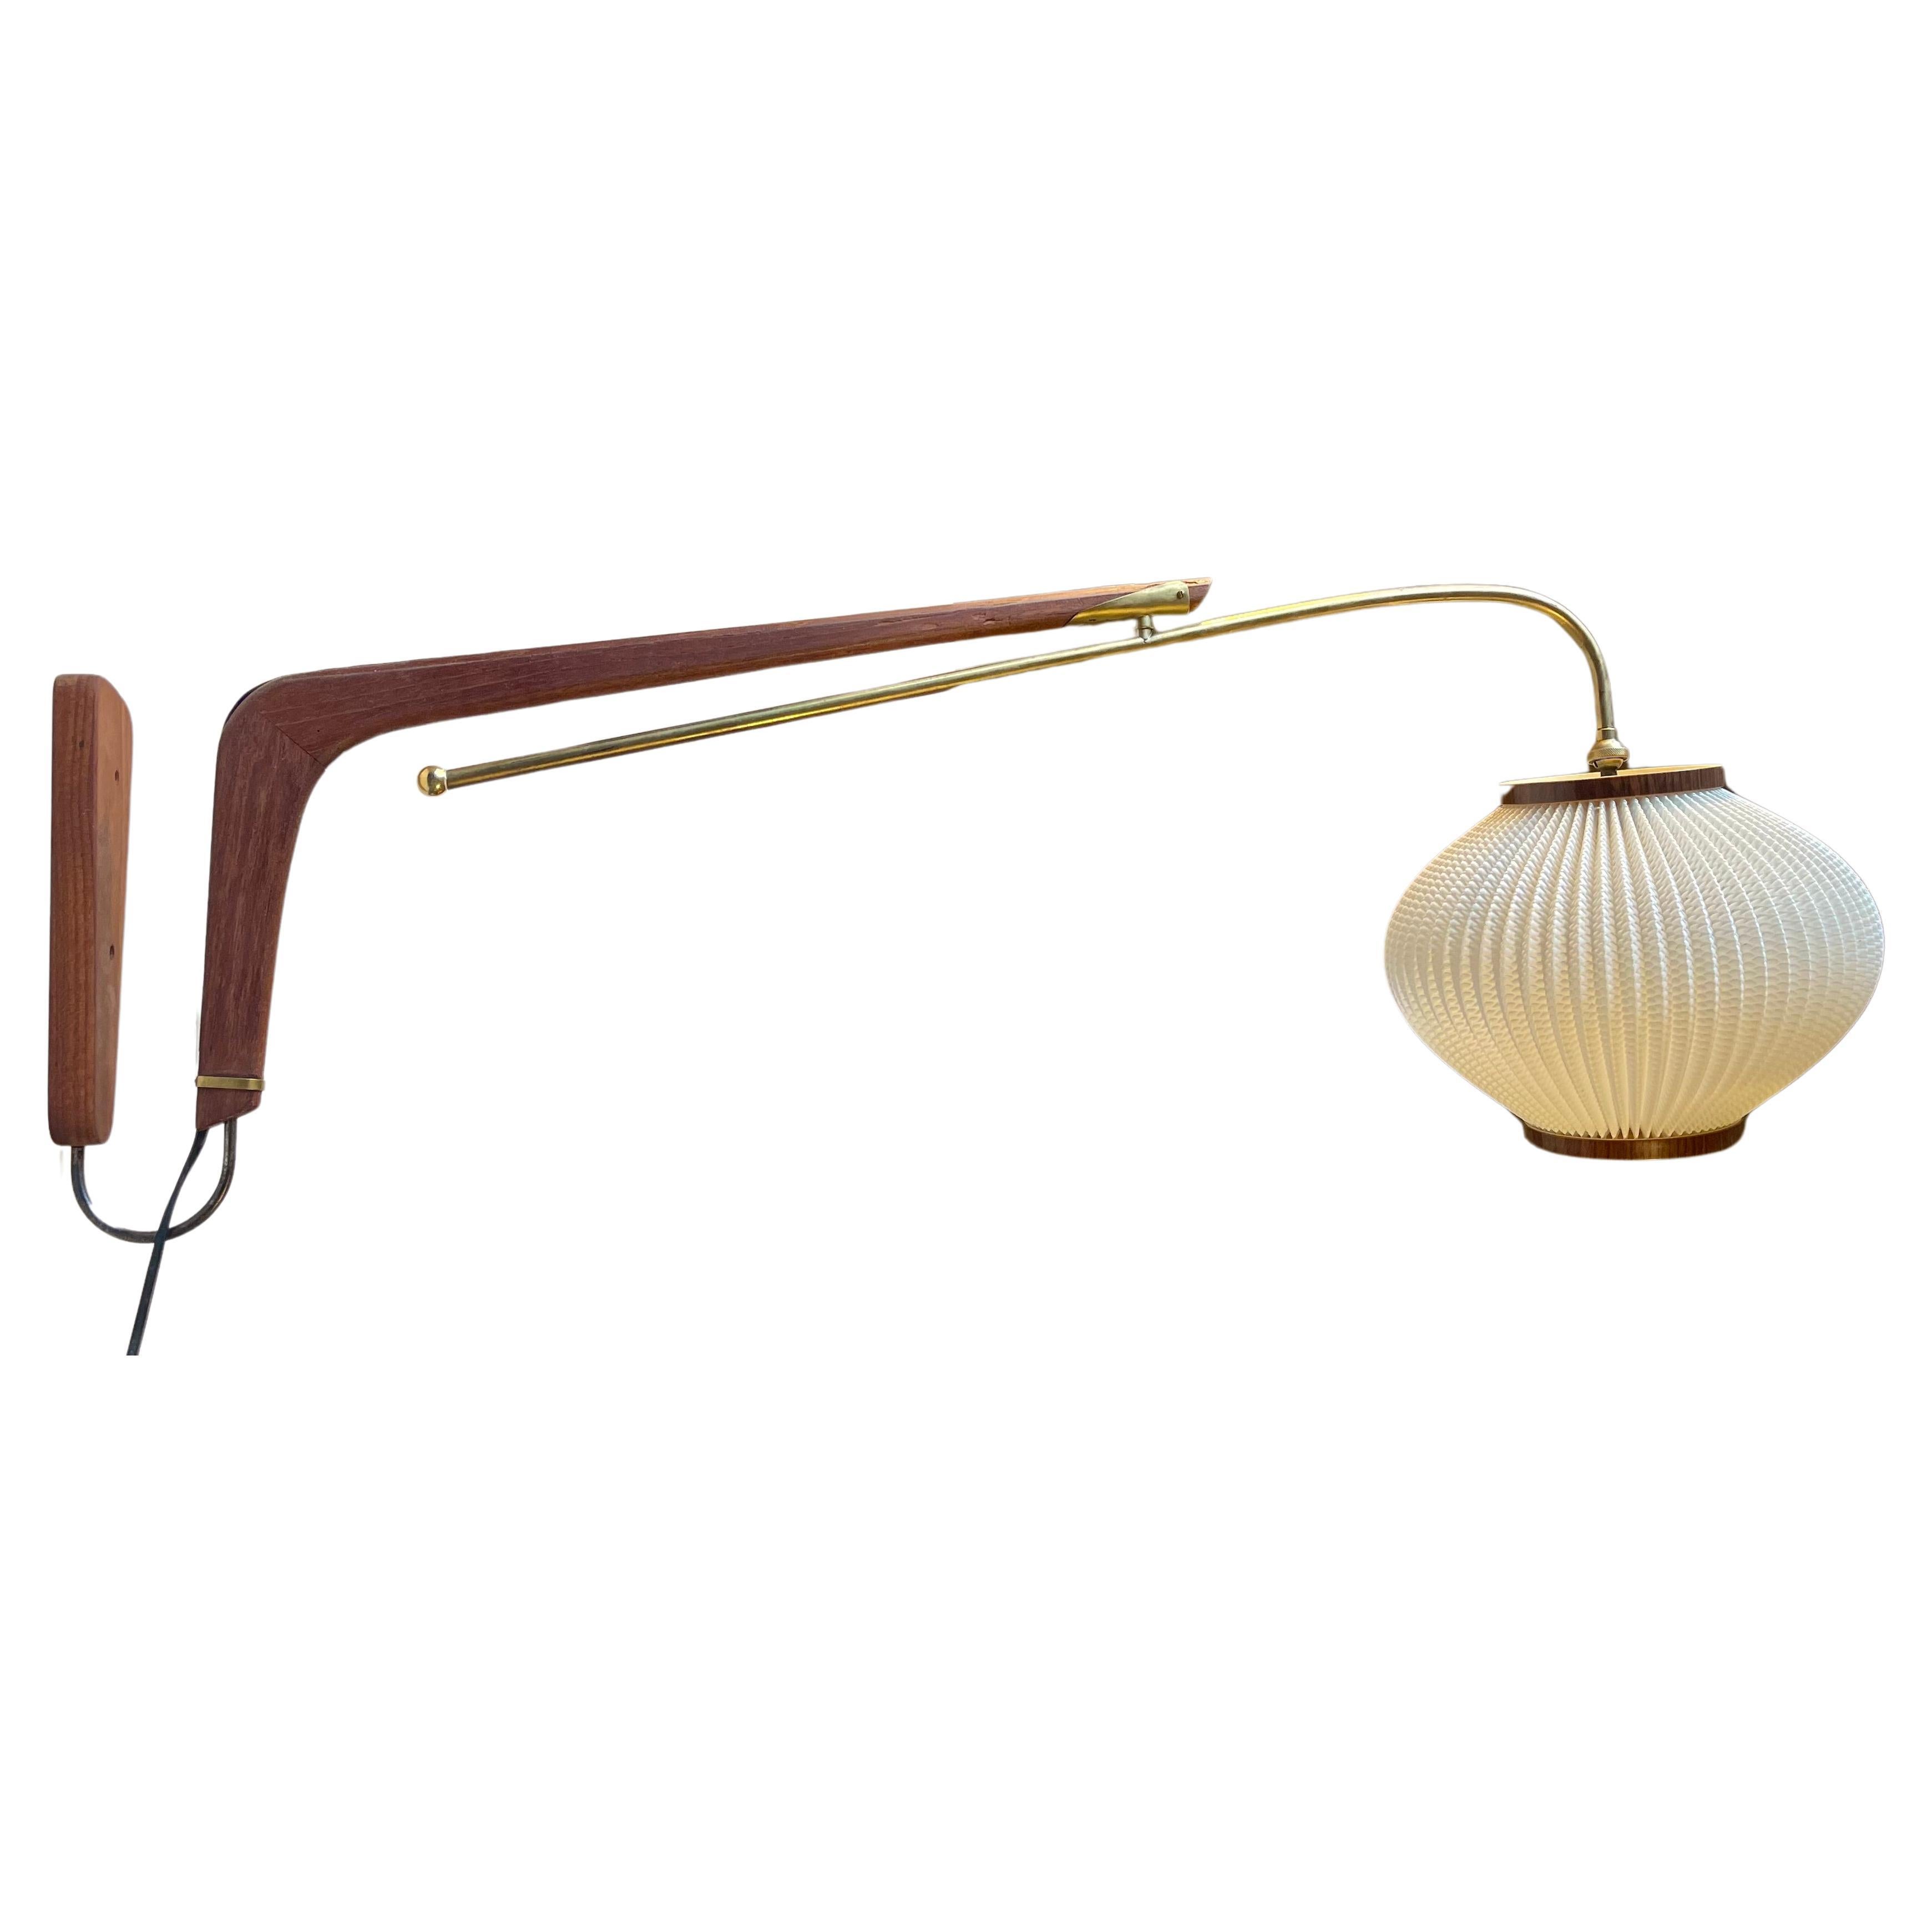 Svend Aage Holm Sørensen Large Articulated Wall Lamp in Teak and Brass, 1950s For Sale